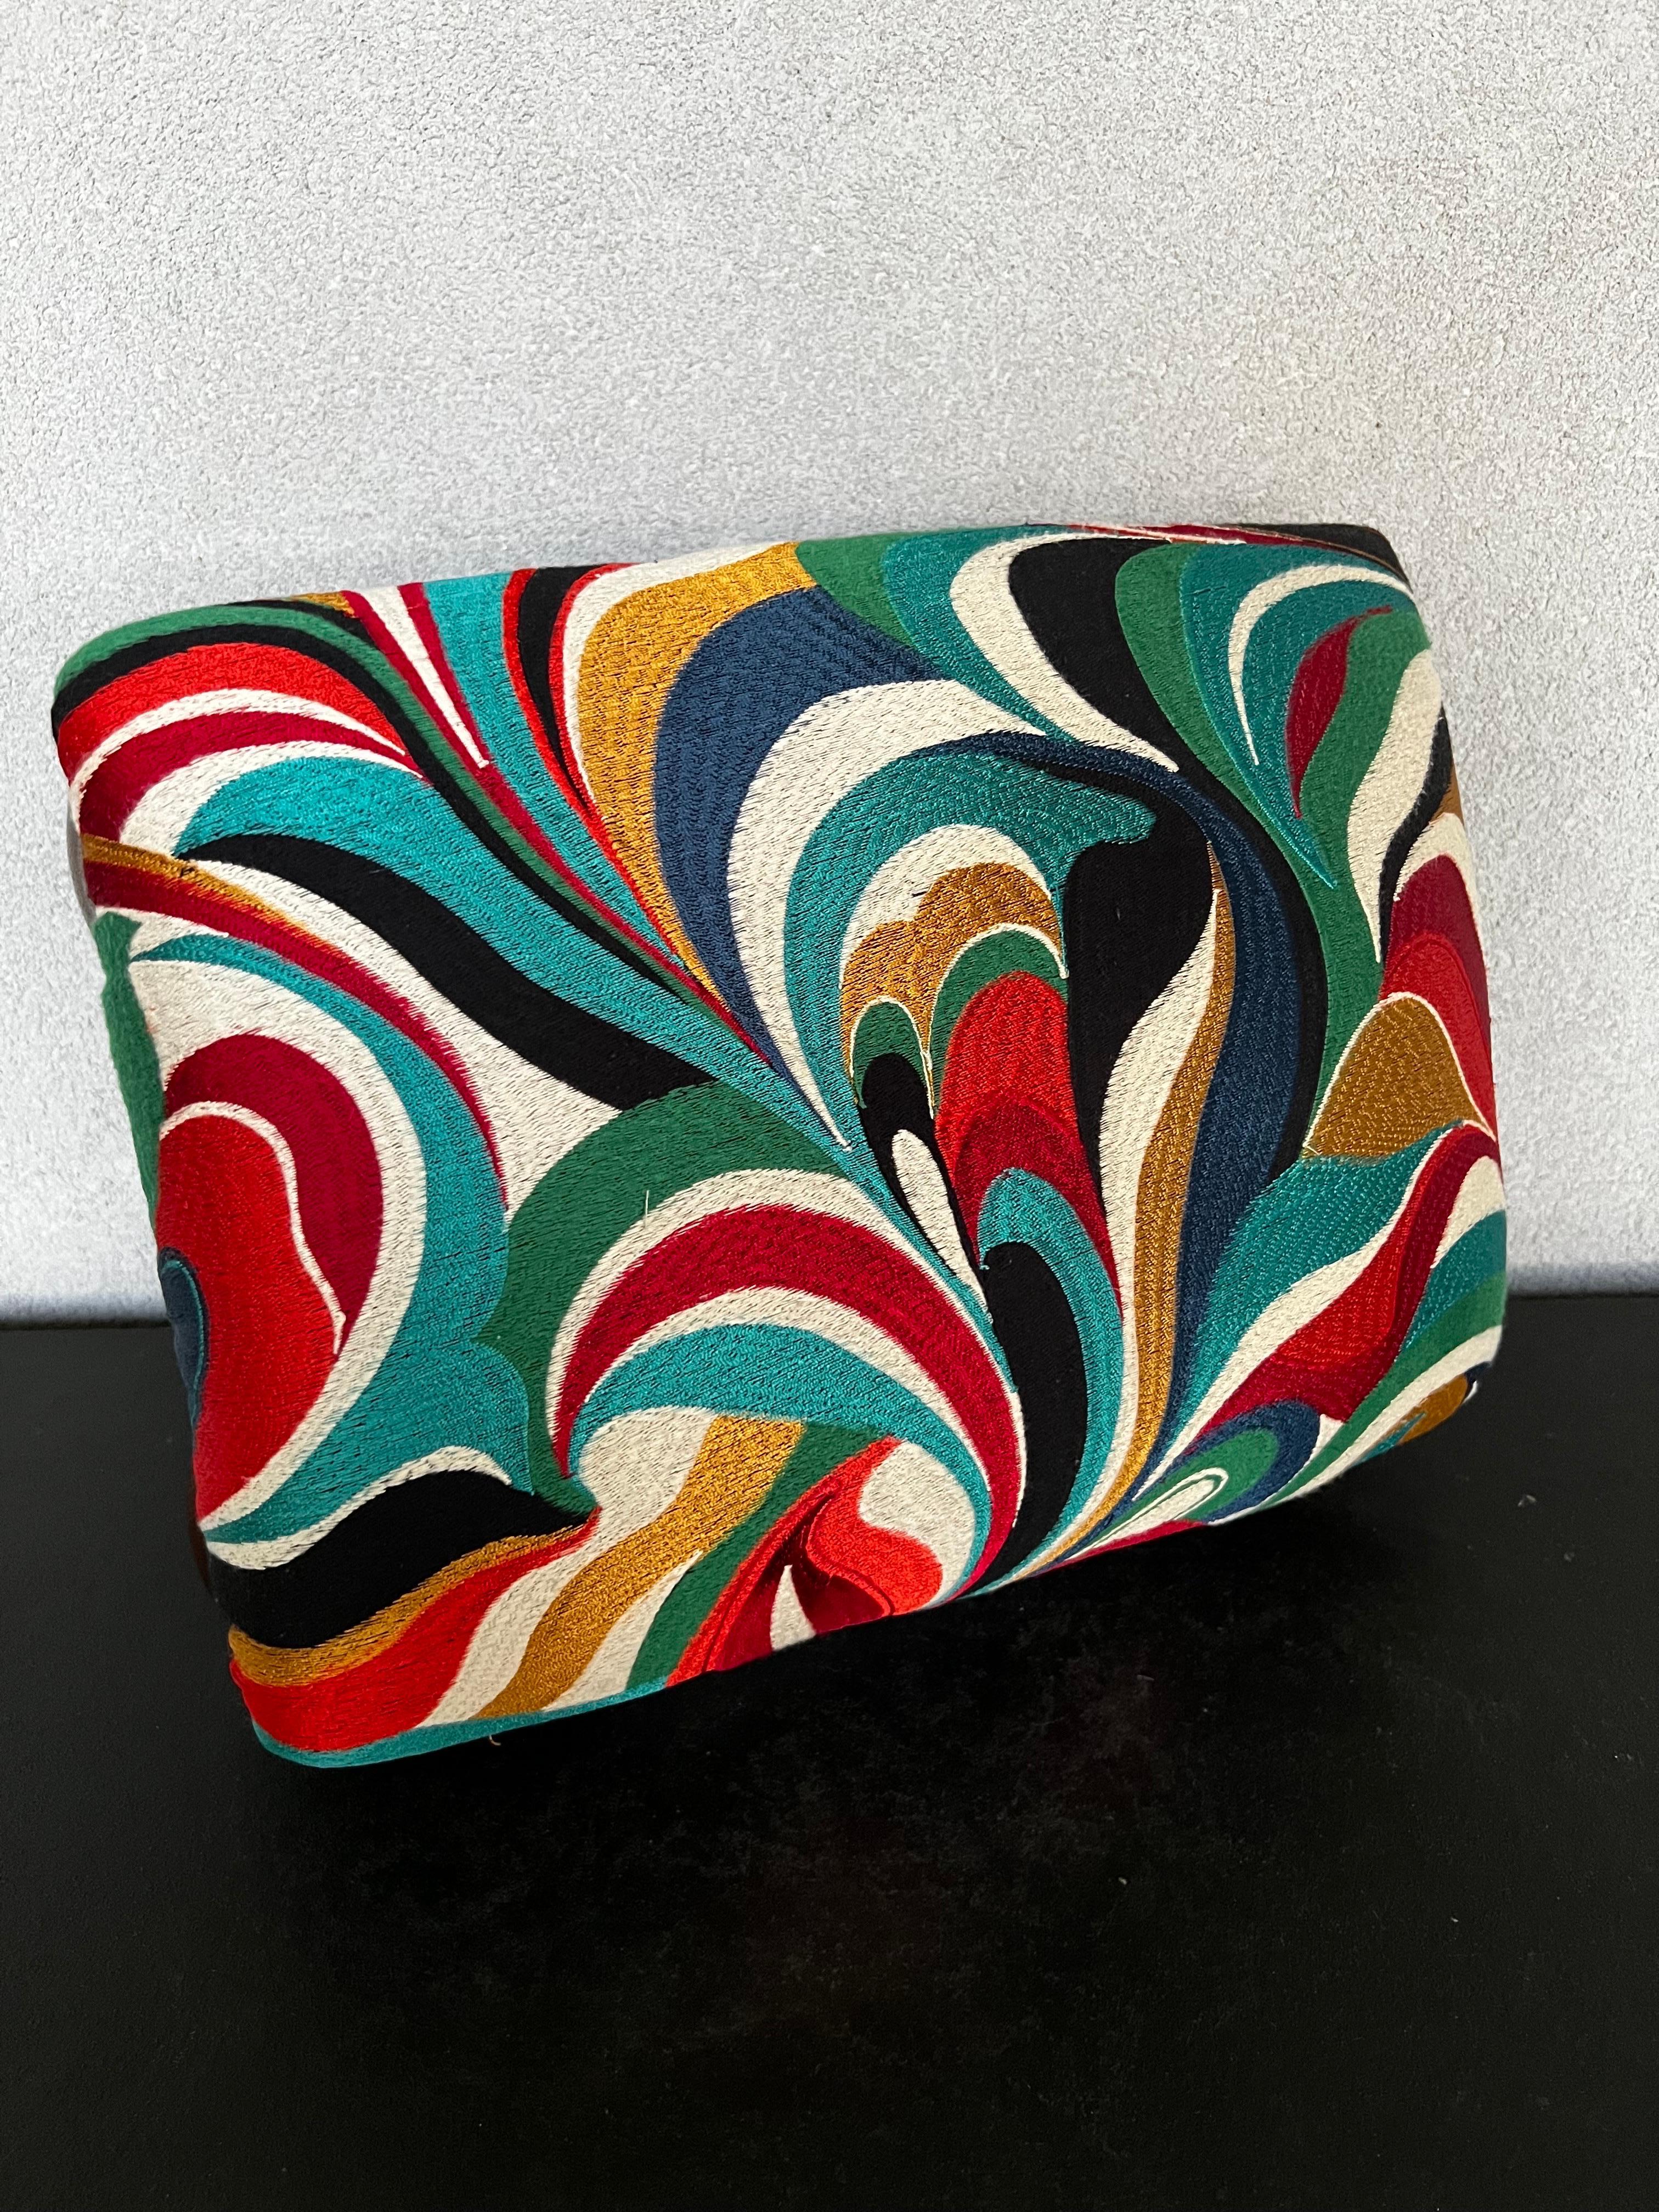 American Refinished Mid-Century Modern Footstool with Abstract Multicolor Embroidered Fab For Sale